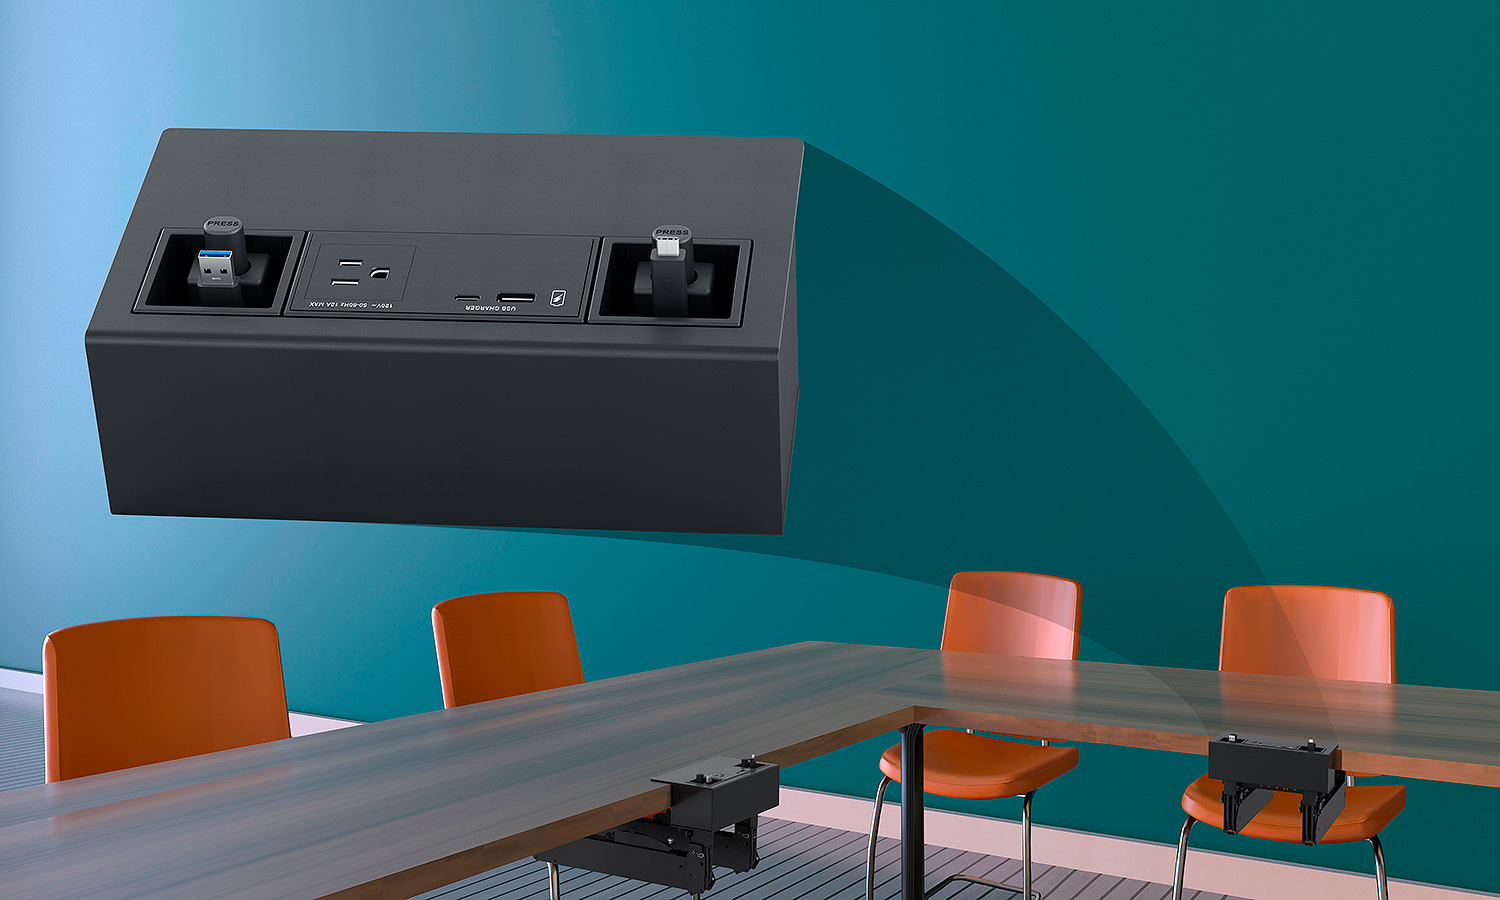 Cable Cubby F55 Edge lets you place semi-permanent AV connectivity, control, and power wherever you need it